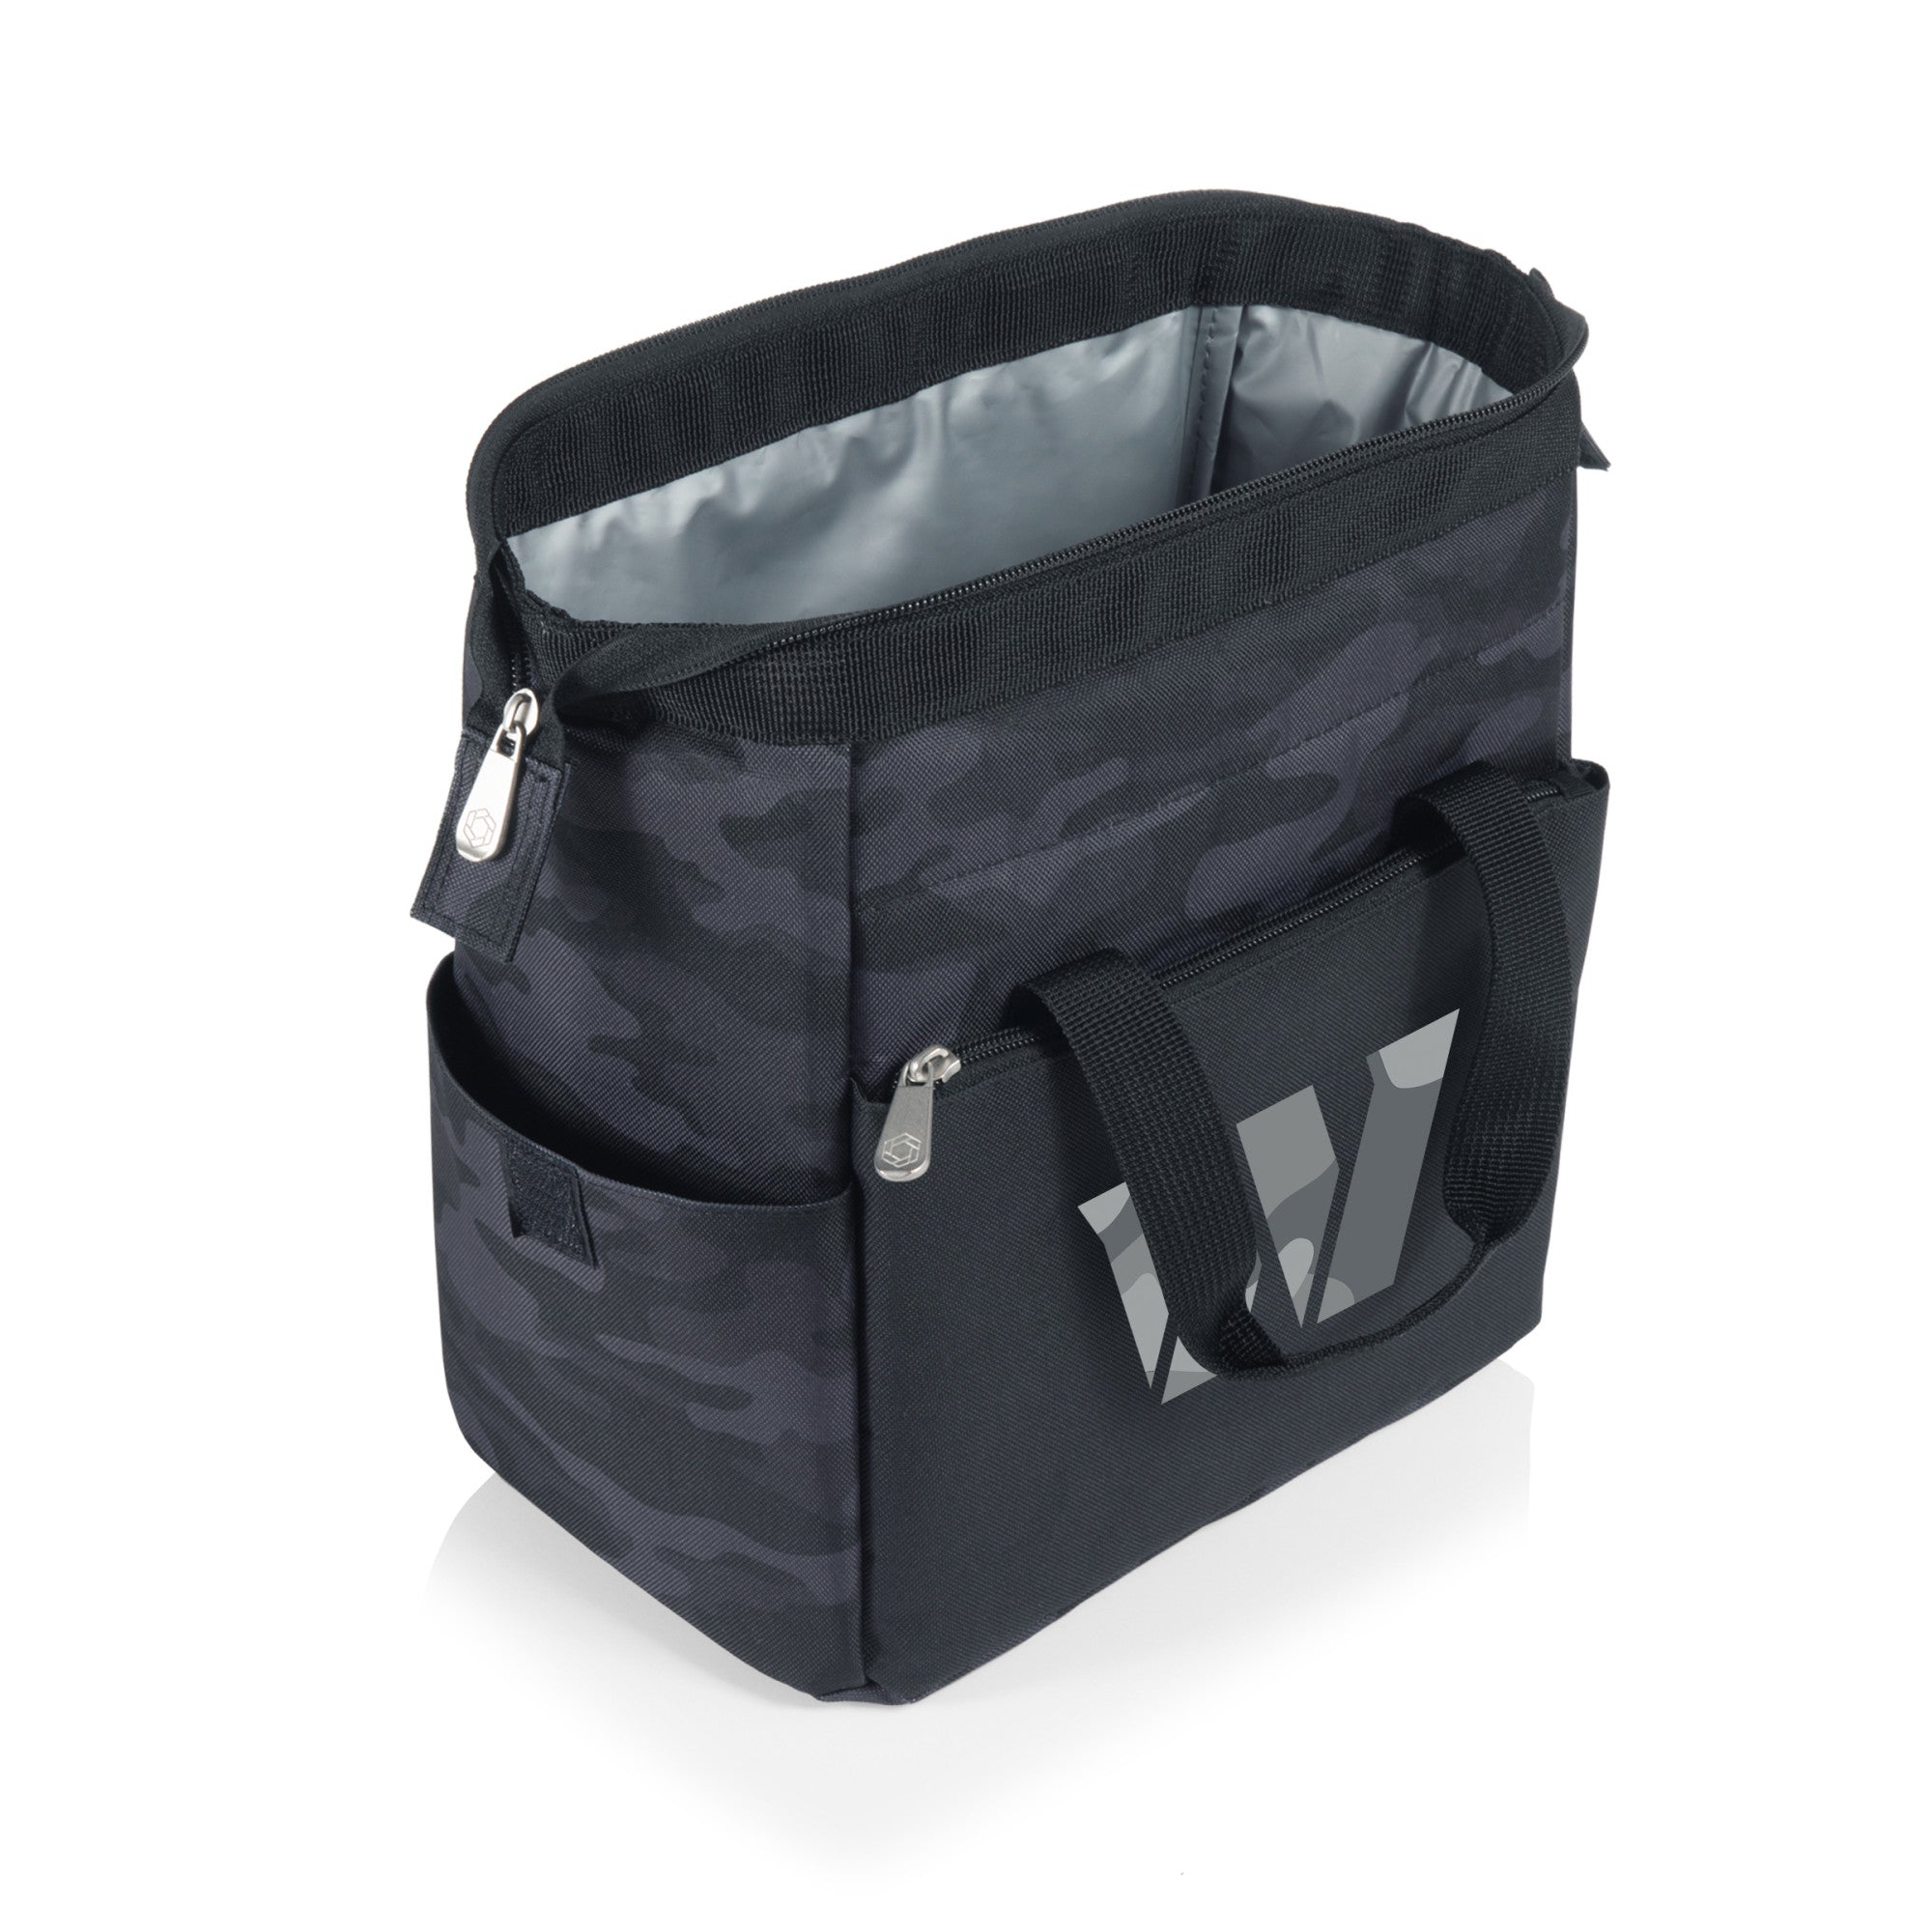 Washington Commanders - On The Go Lunch Bag Cooler